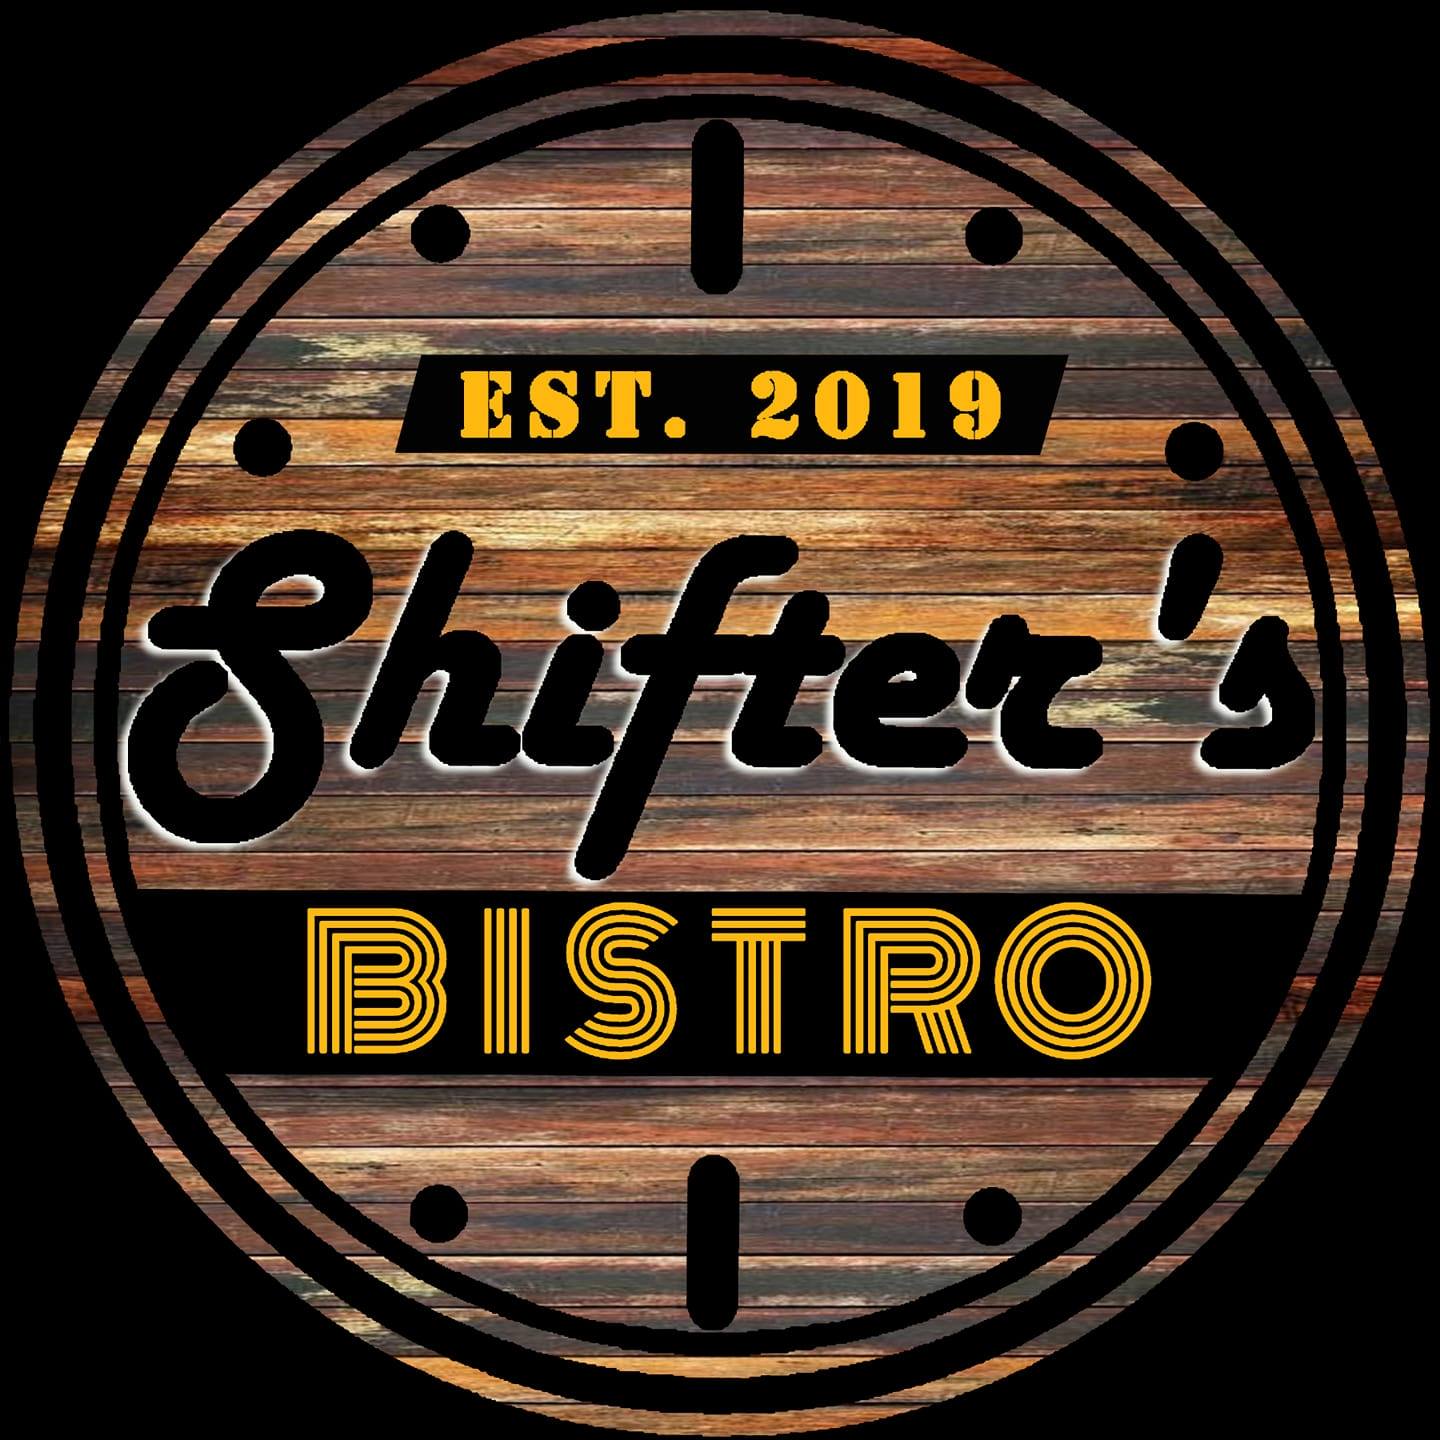 Shifters Bistro Logo, Bacolod Philippines